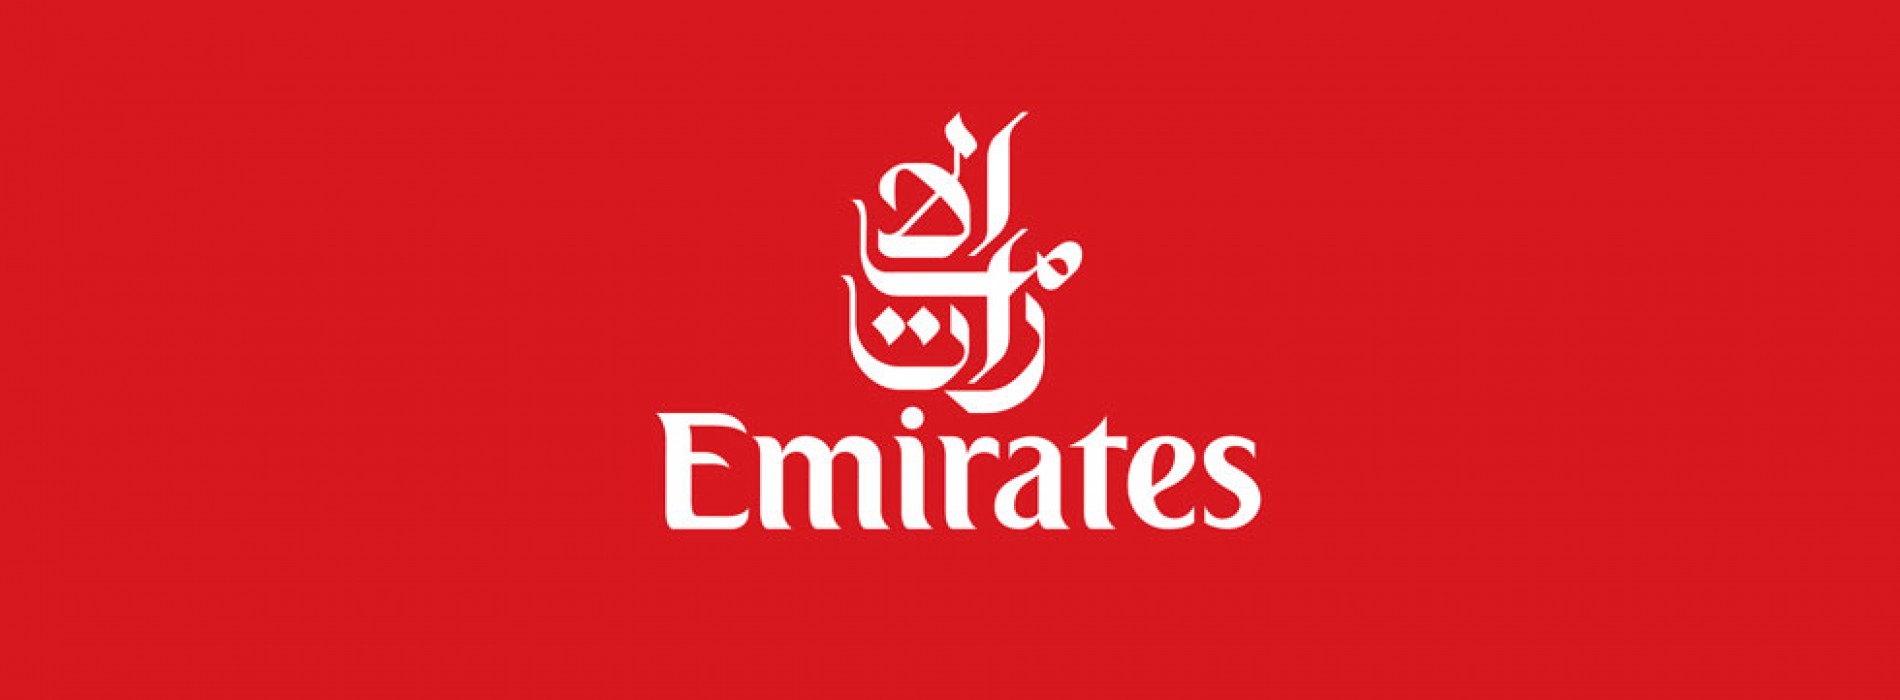 Emirates offers Iftar service for Ramadan